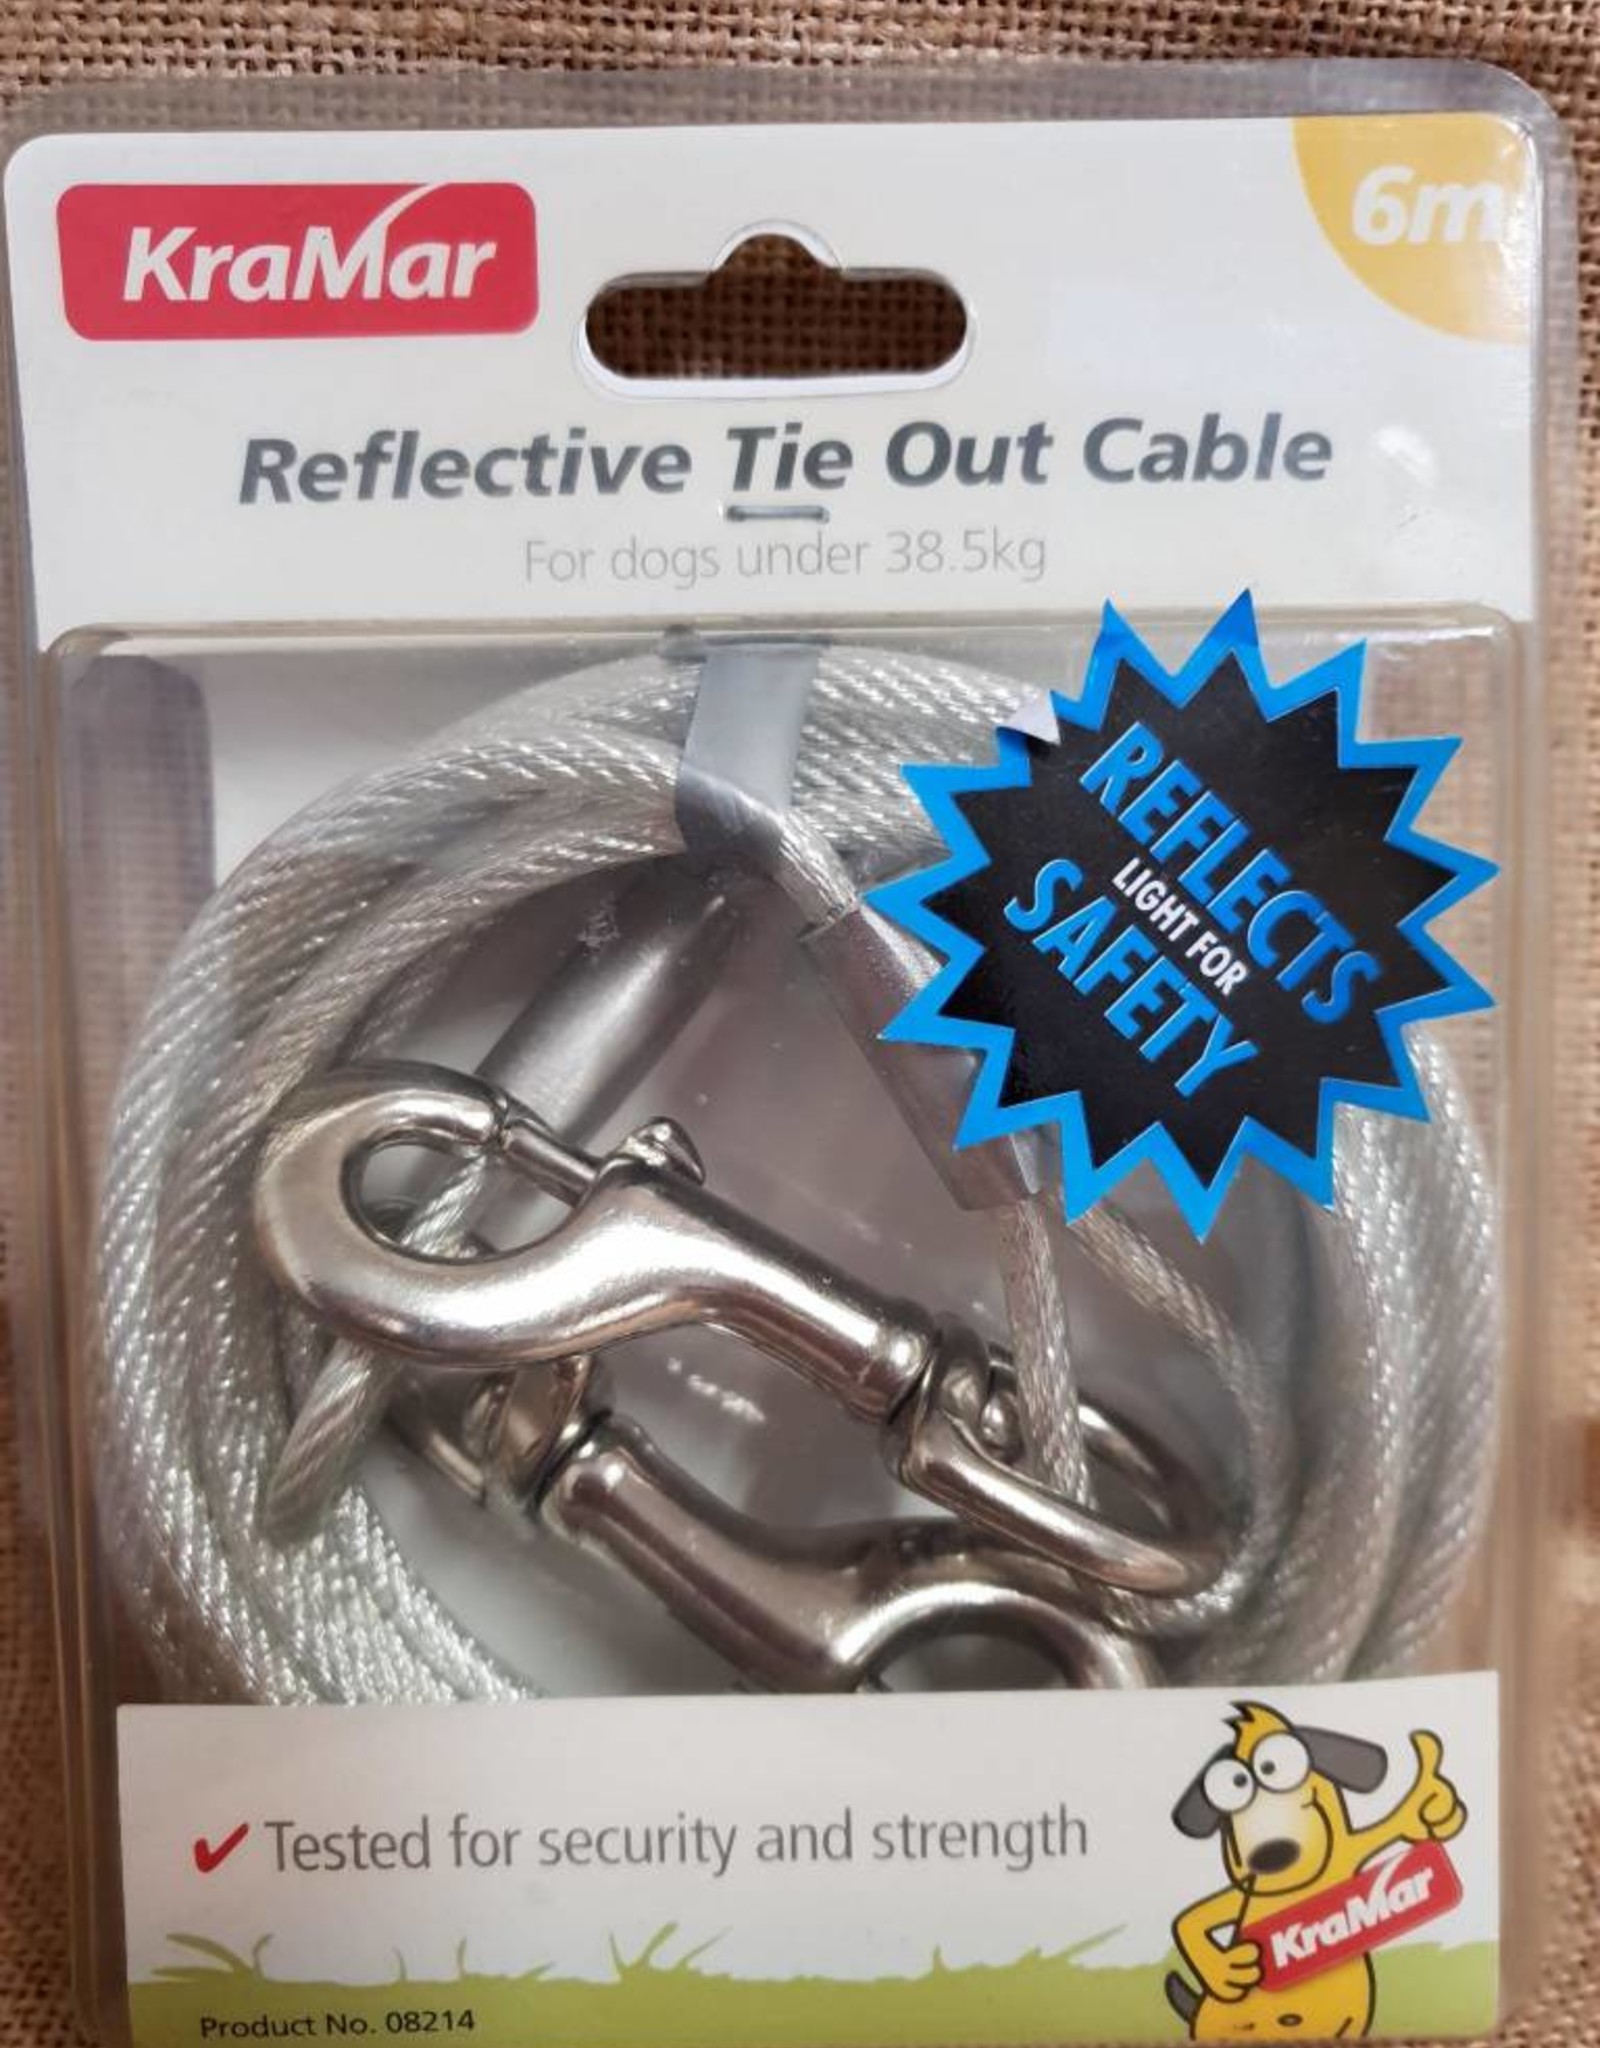 Kra-Mar Reflective Tie out Cable 6m for Dogs under 38.5kg